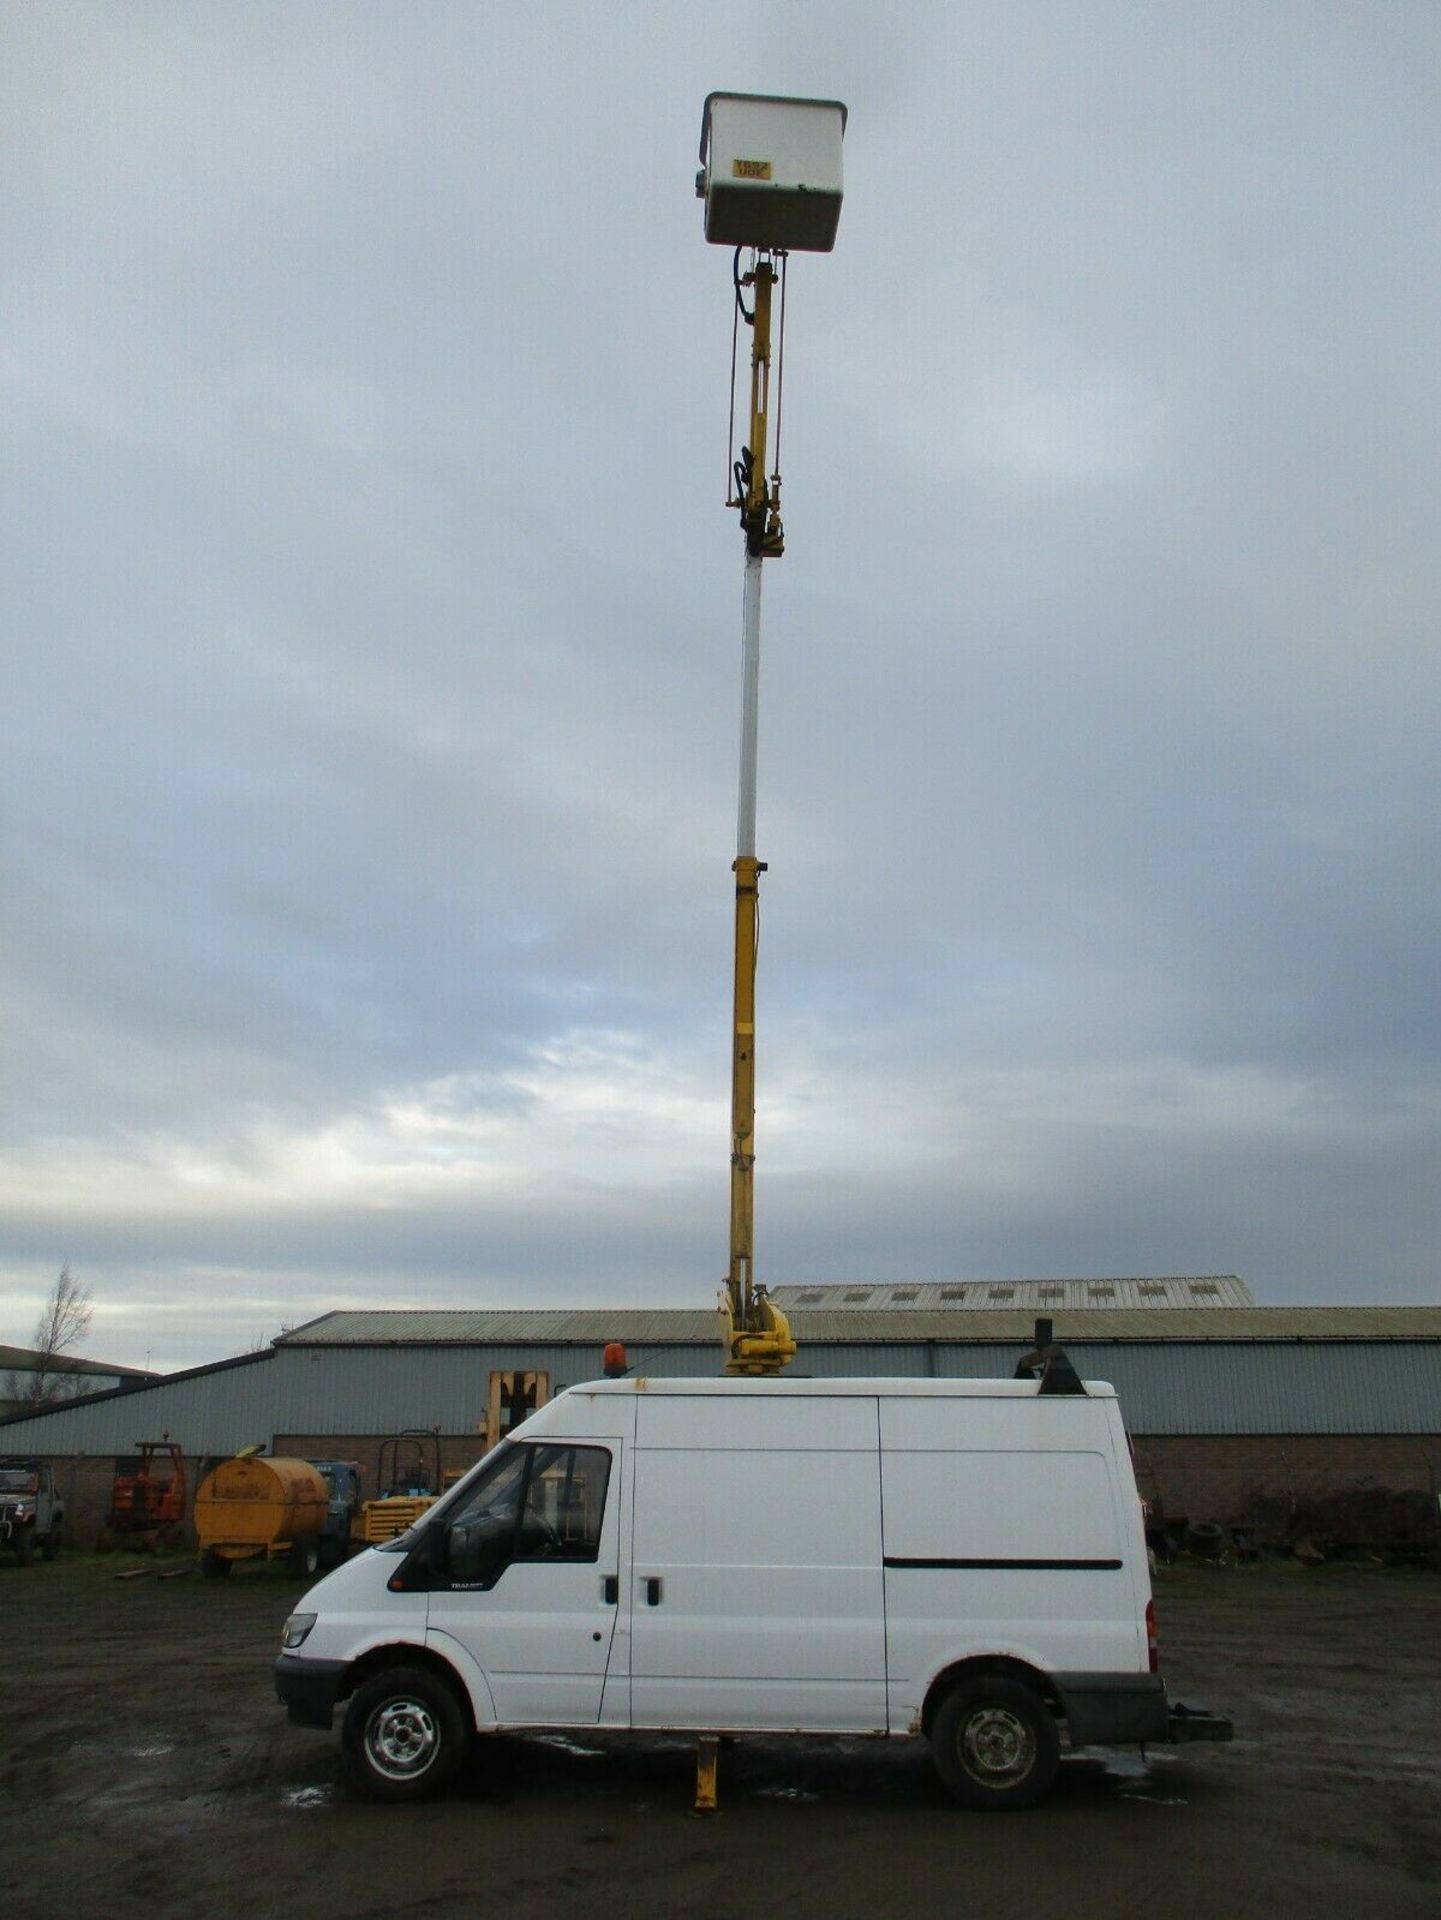 Ford Transit cherry picker - Image 8 of 11